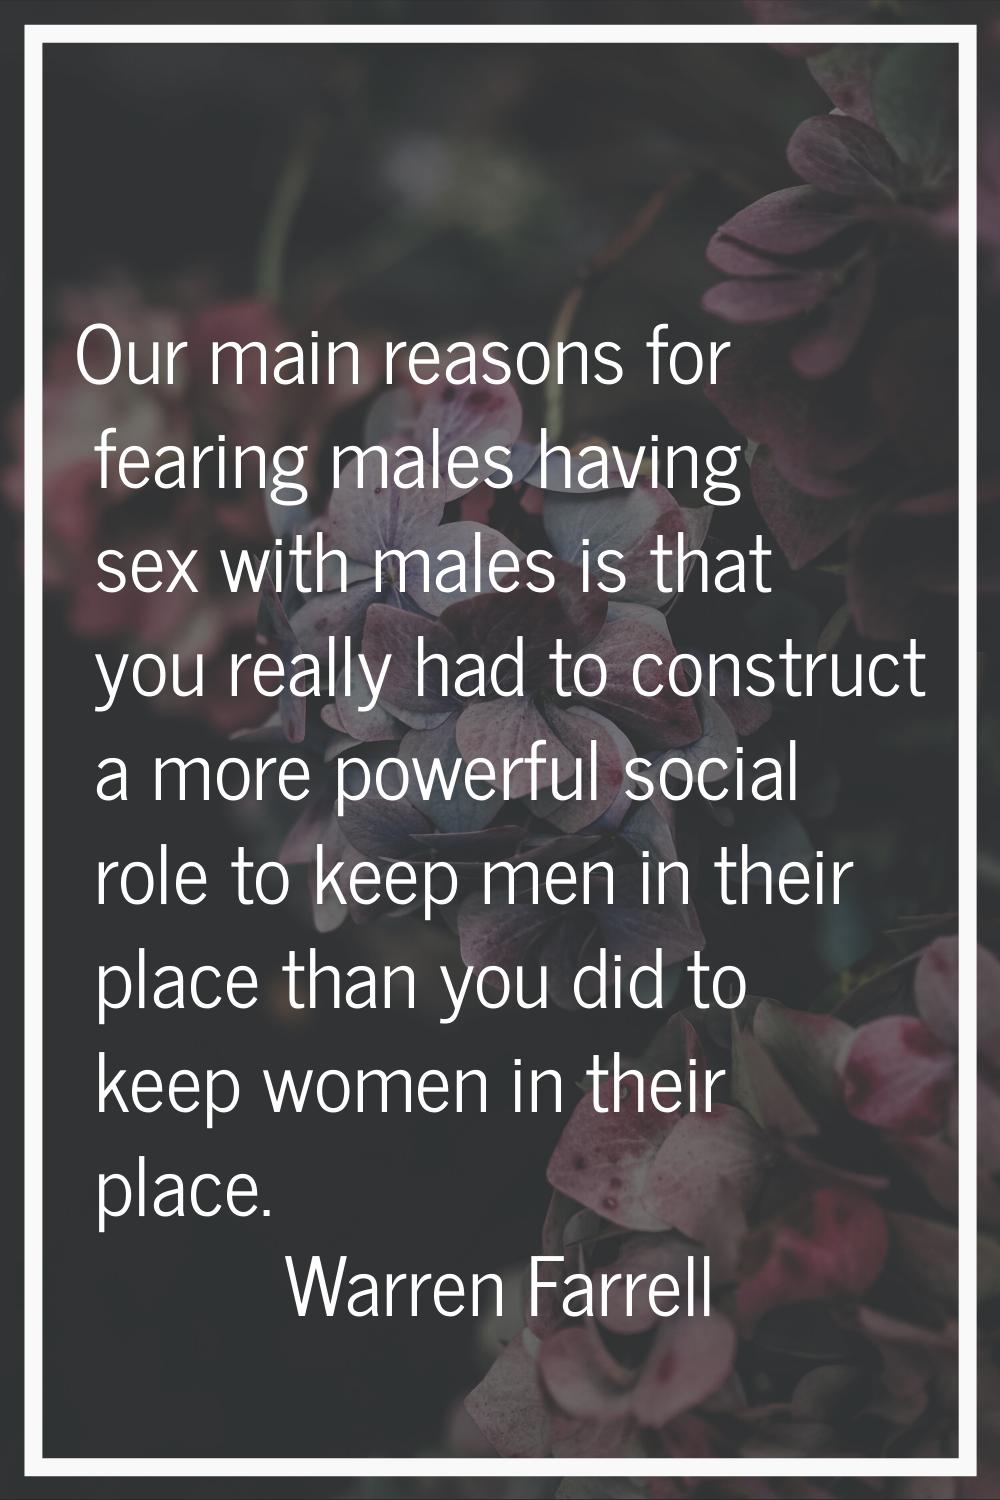 Our main reasons for fearing males having sex with males is that you really had to construct a more